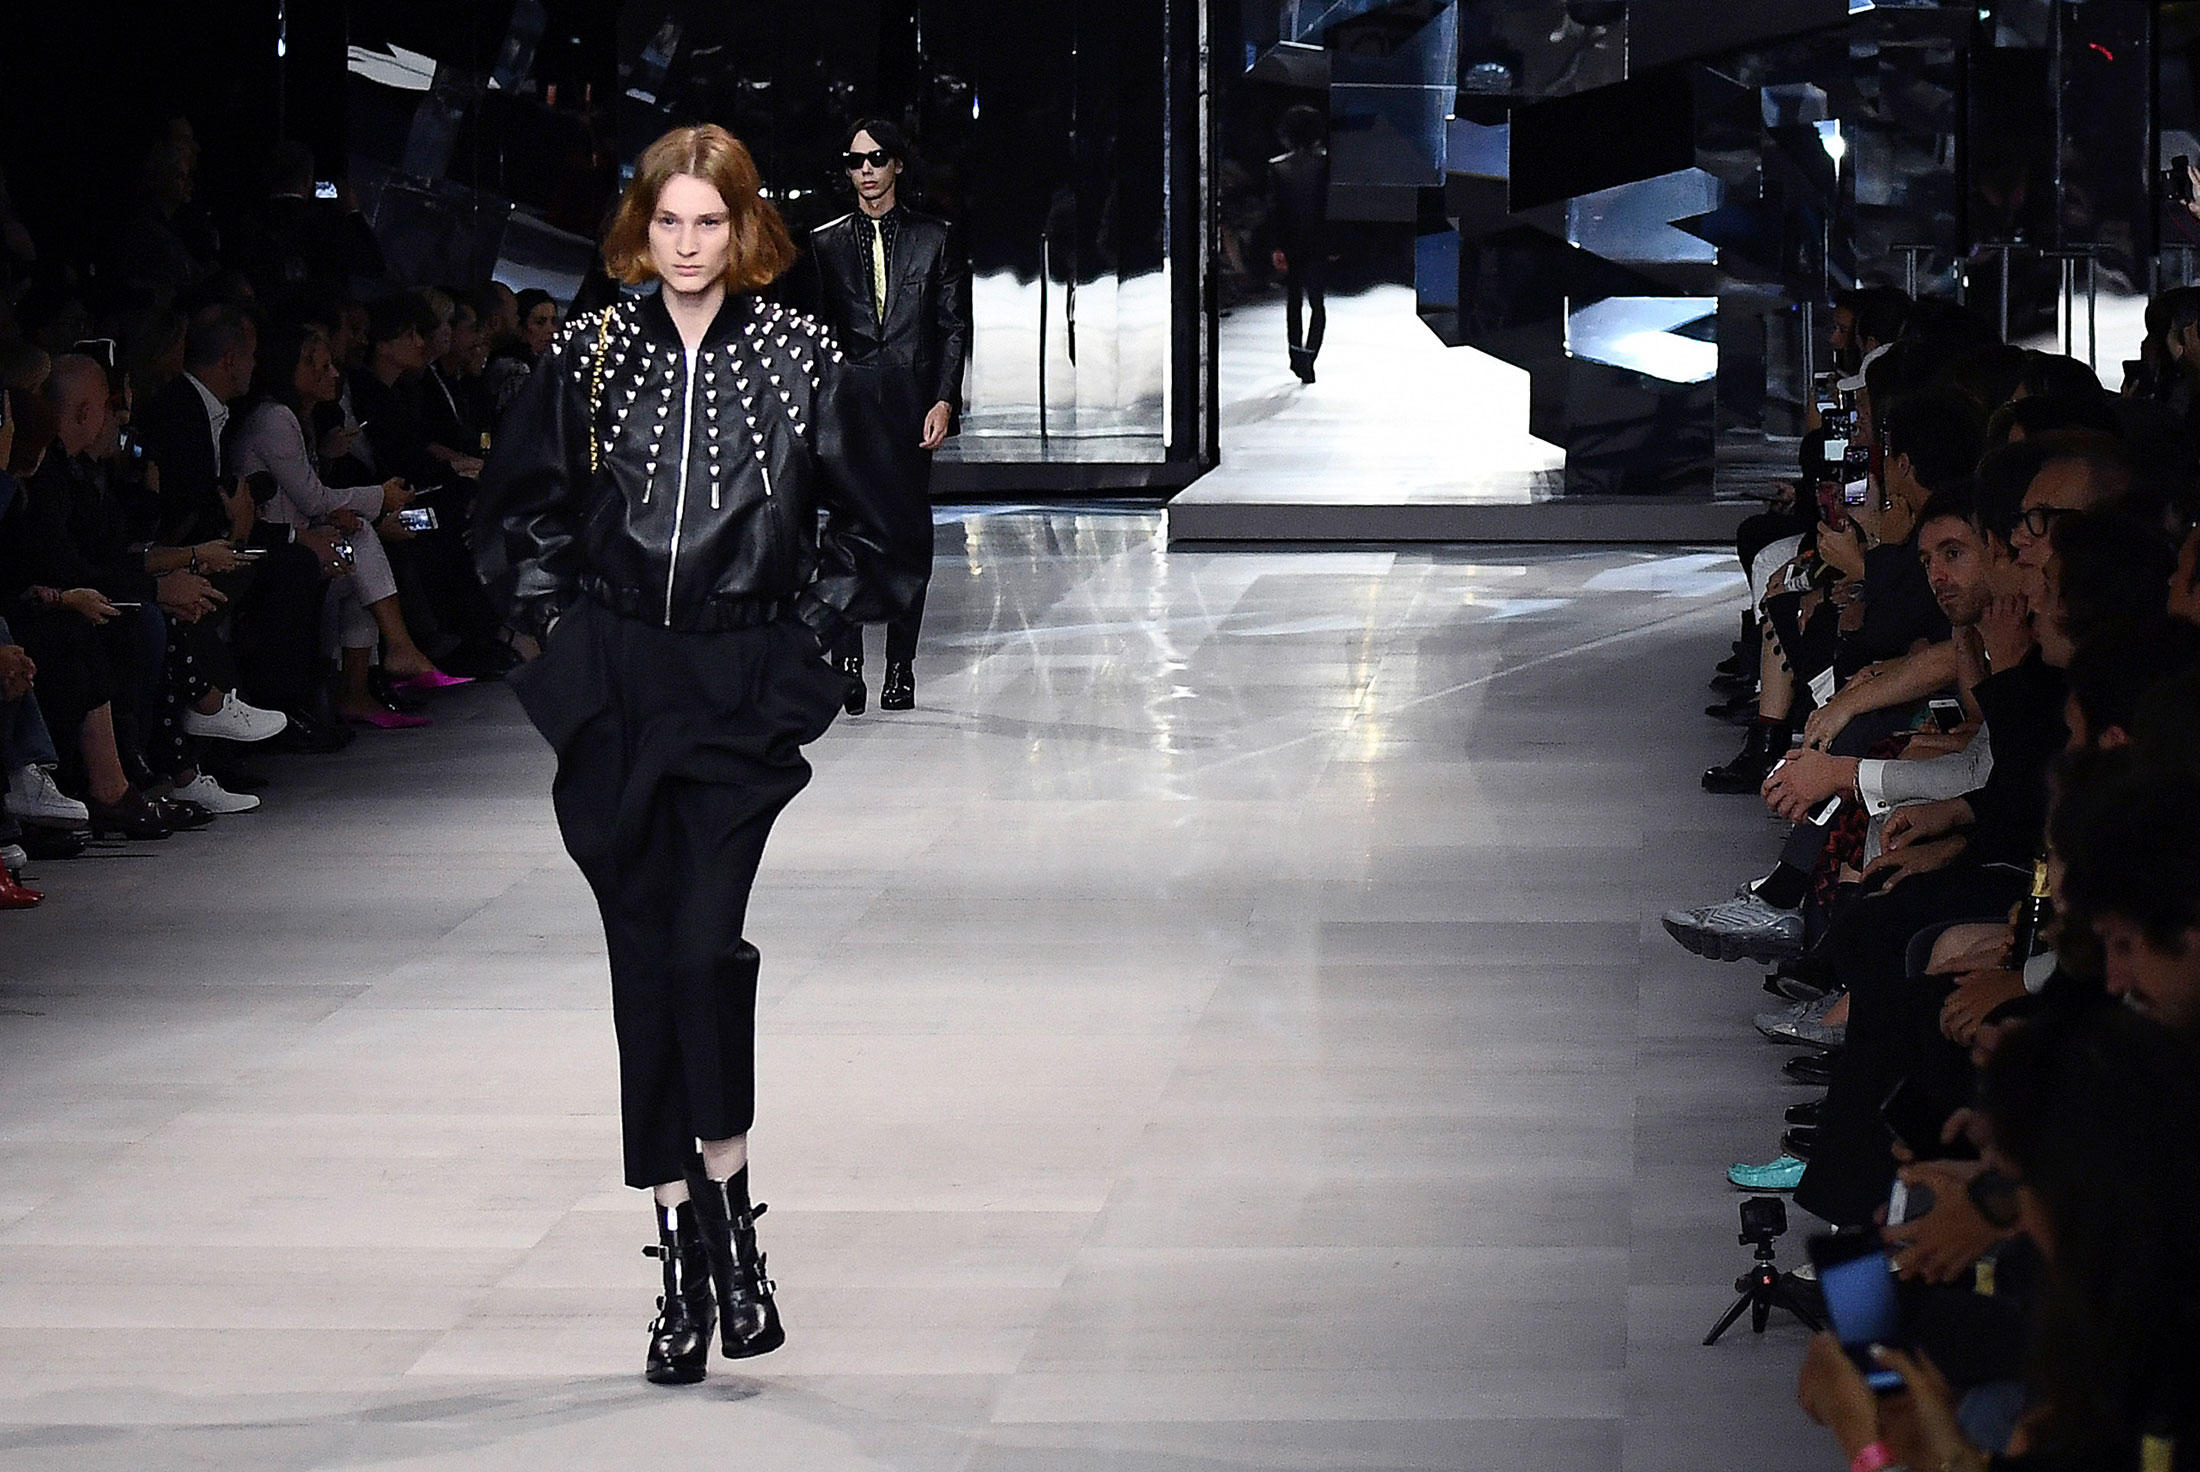 A Runway Show at LVMH's Celine Just Shifted Luxury's Landscape - Bloomberg